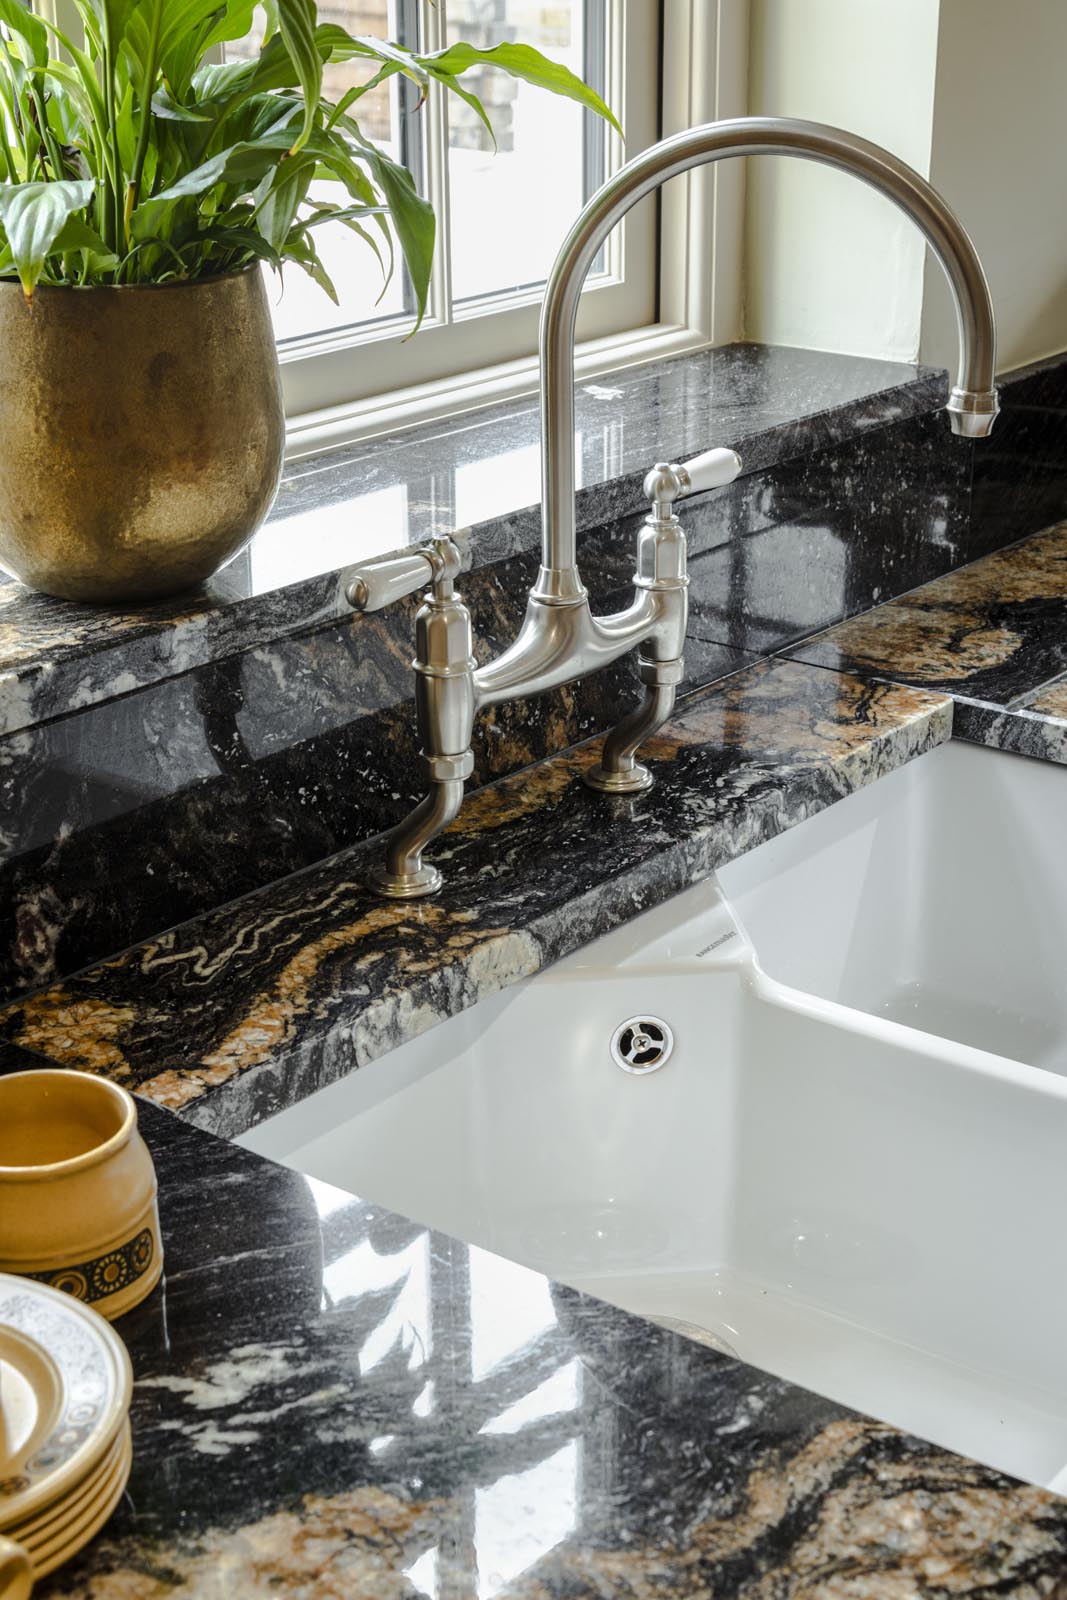 Kitchen sink with marble worktop, traditional tap and Belfast sink